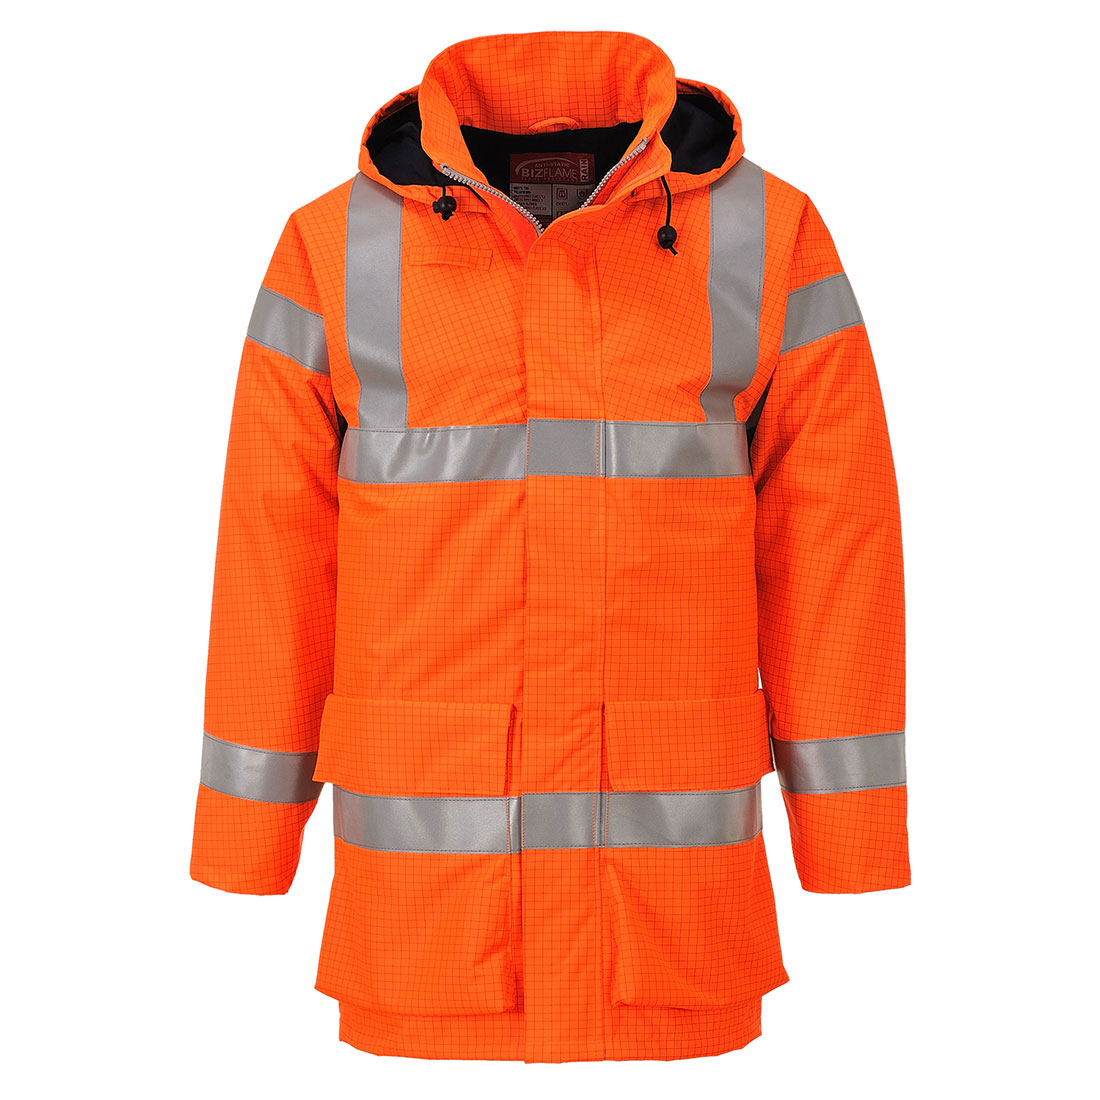 Rain Flame Resistant Multi-Protection Hi-Vis Jacket with Lining